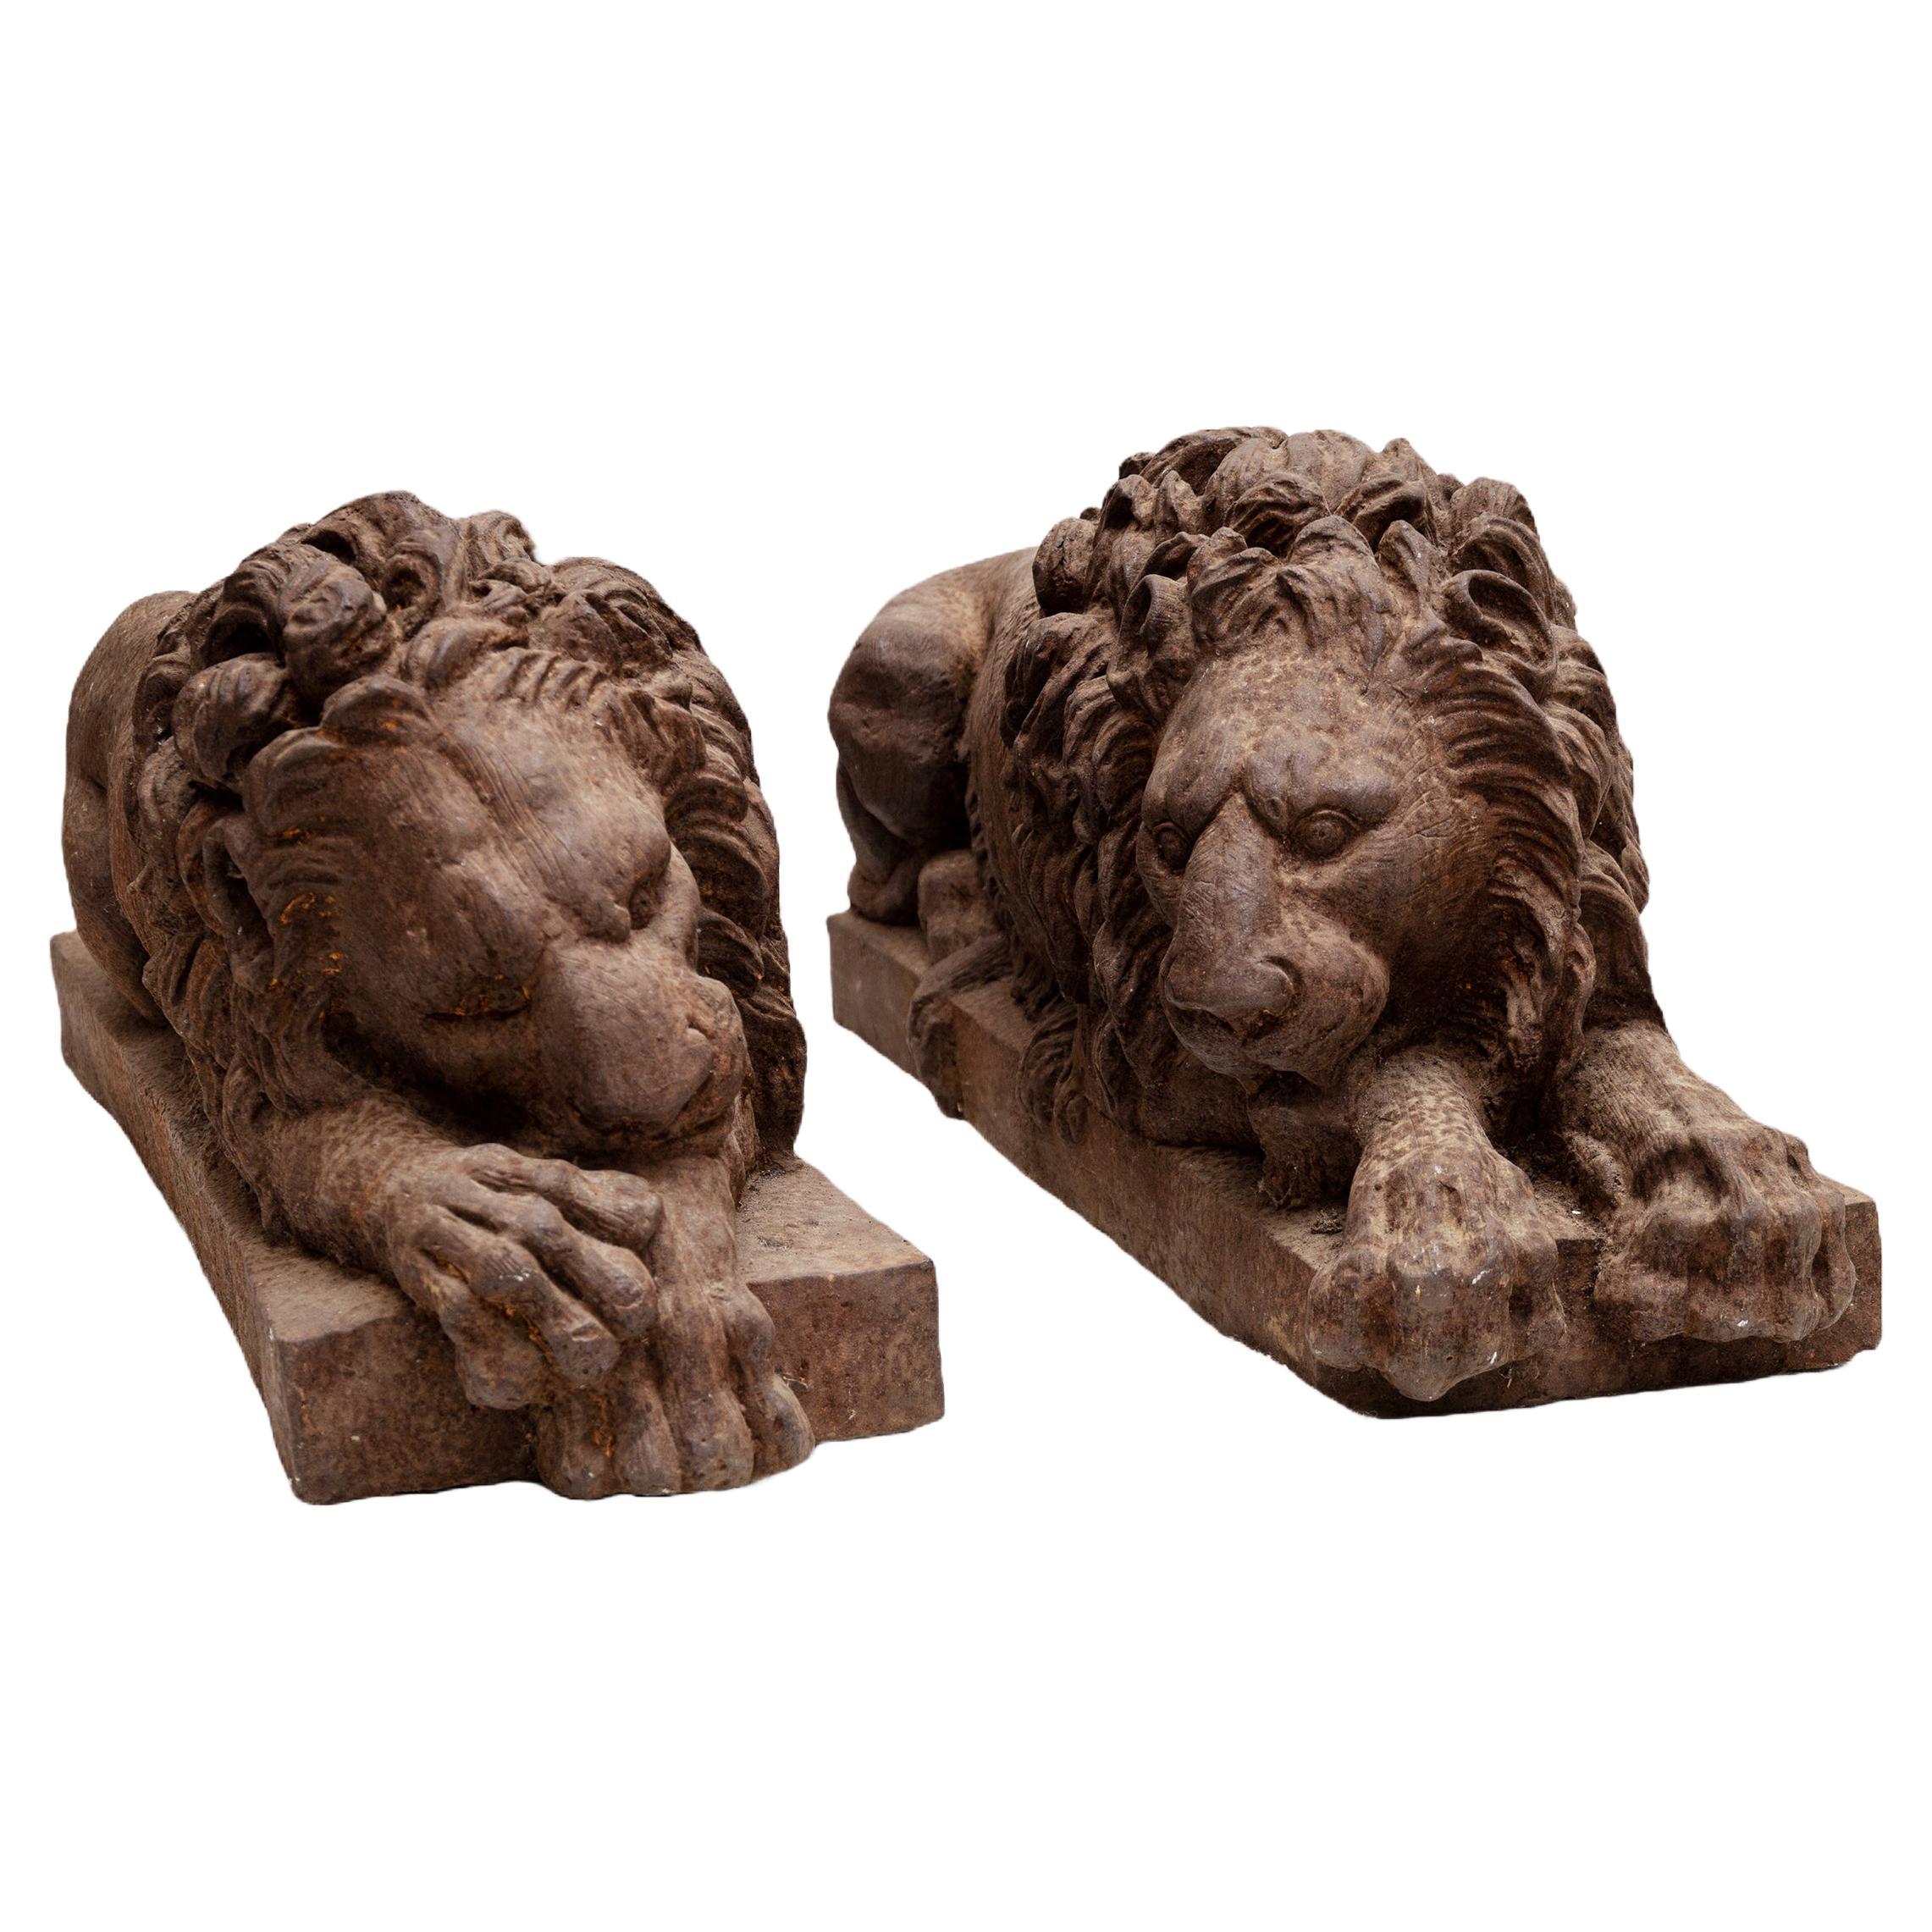 A Pair Of Mid-19th Century Chatsworth Lions  For Sale